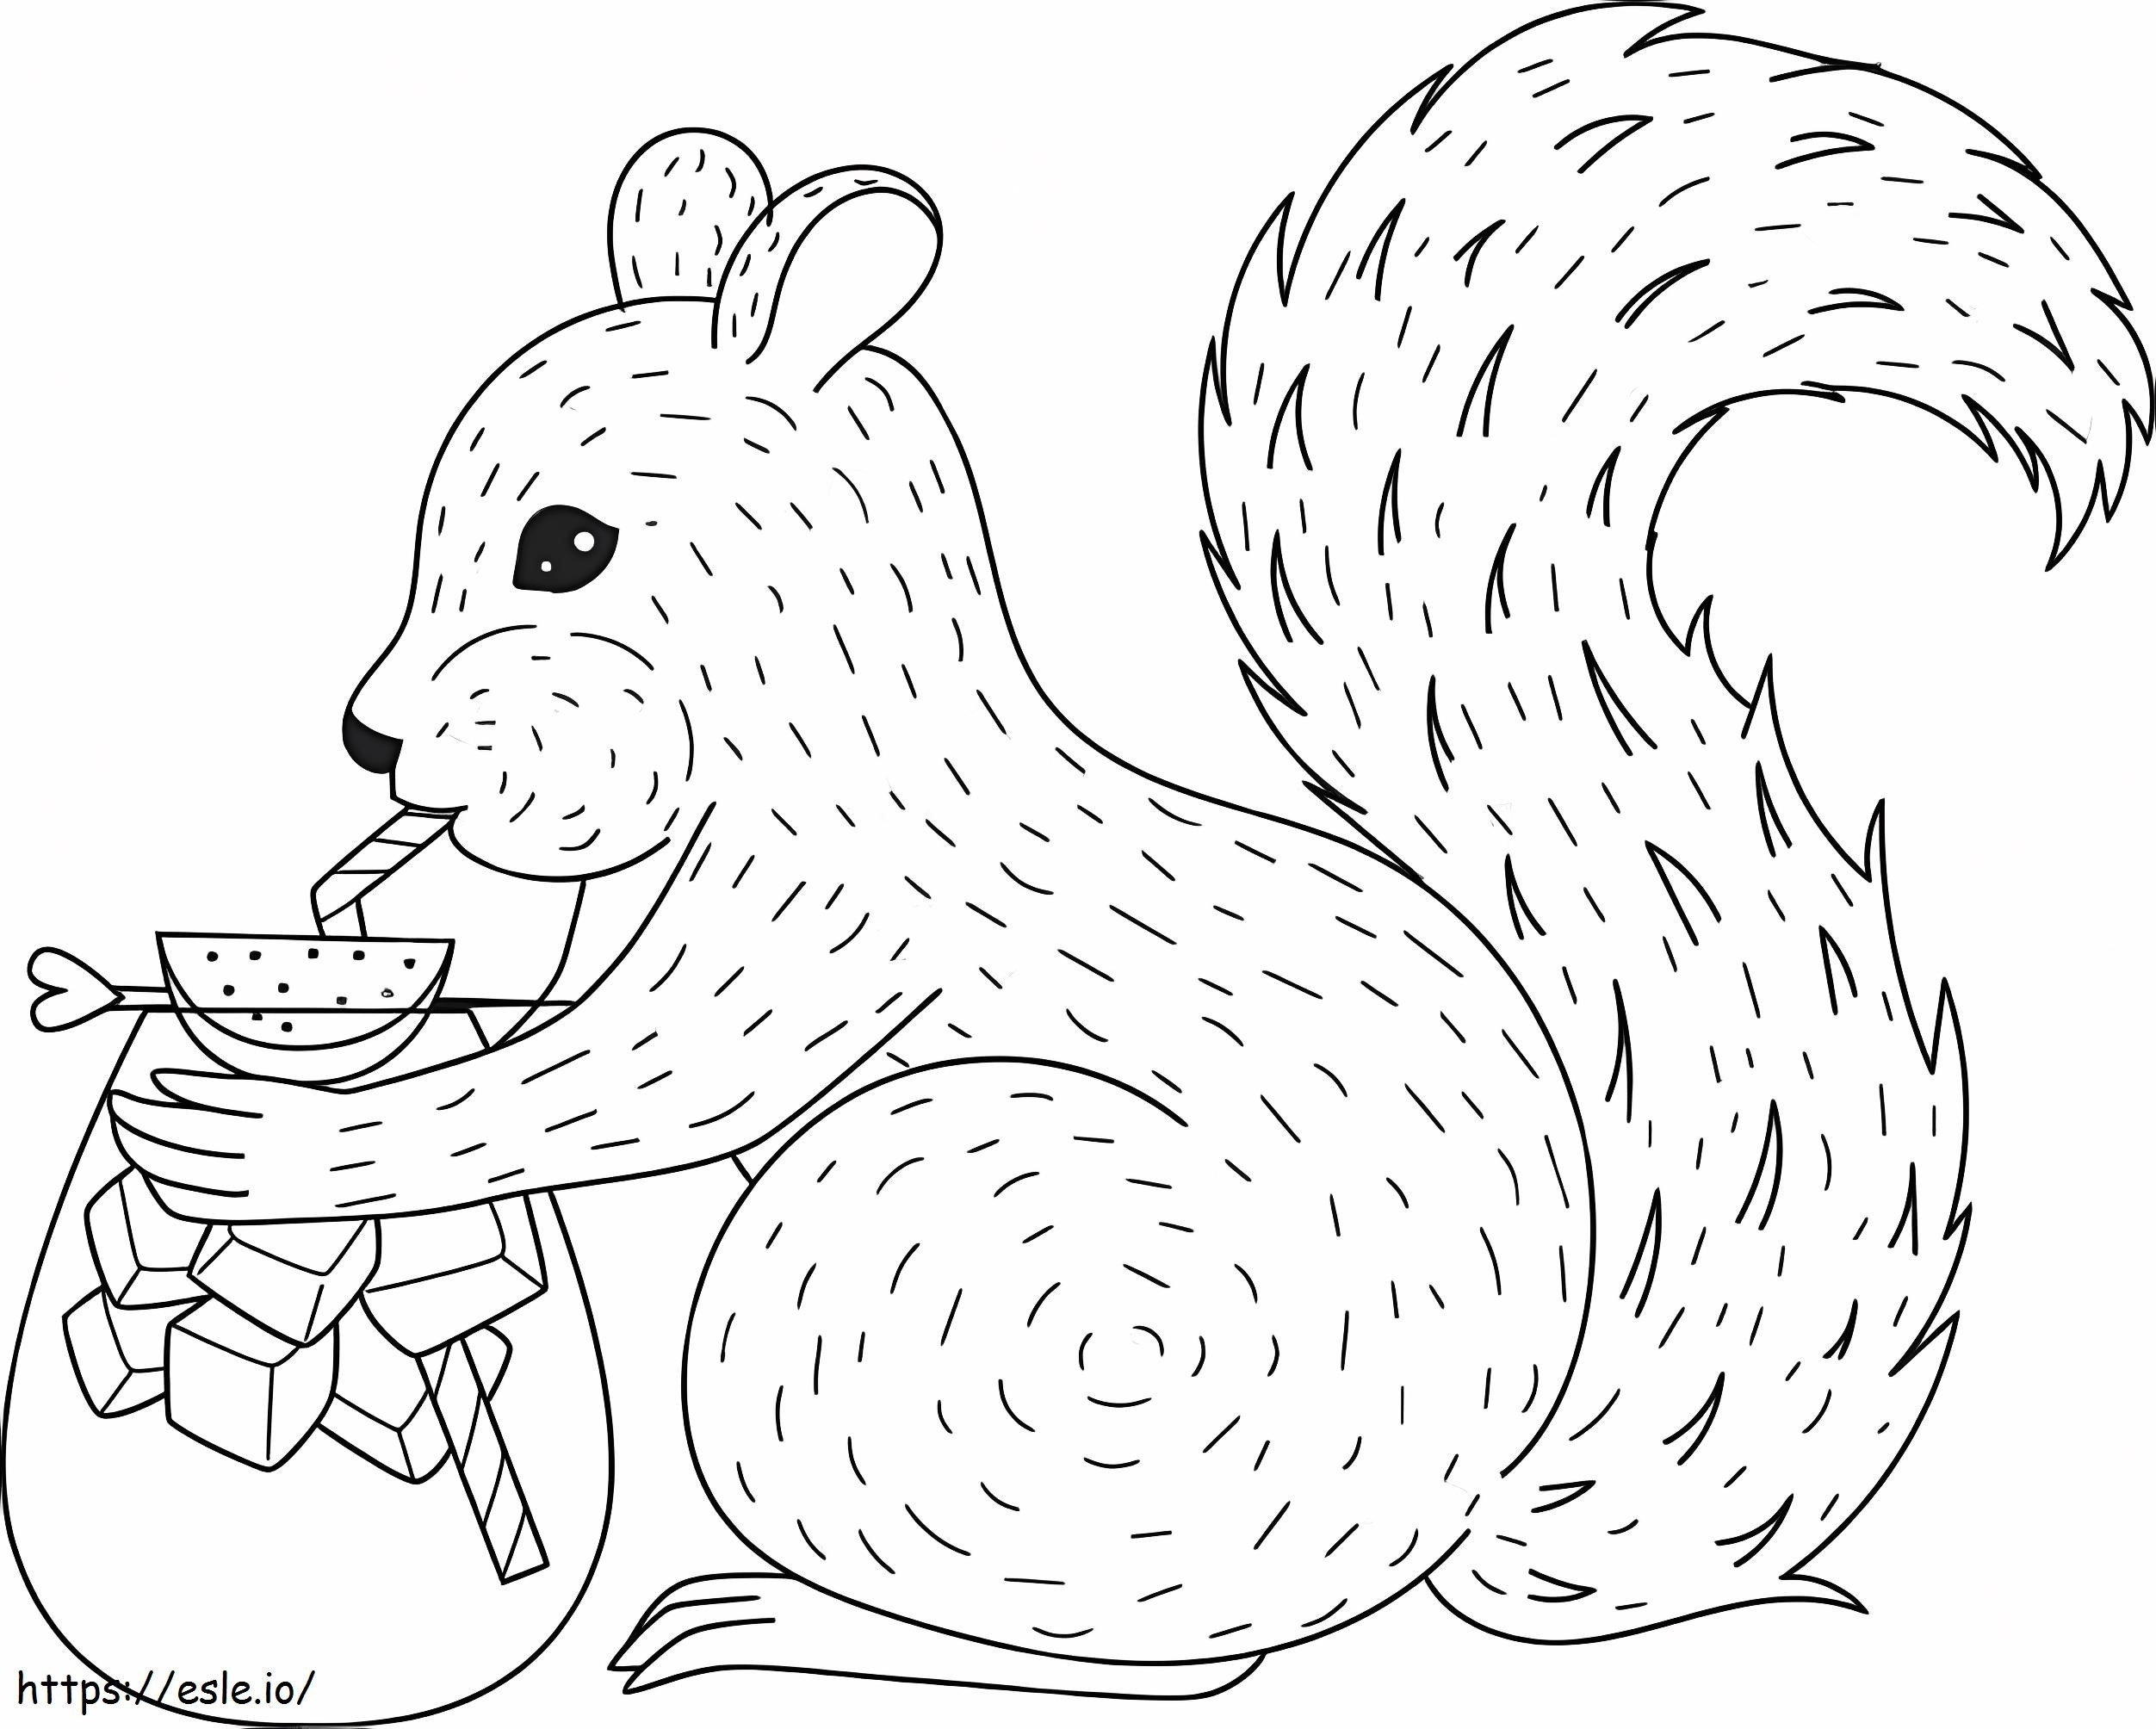 Squirrel Drinking Cocktail coloring page